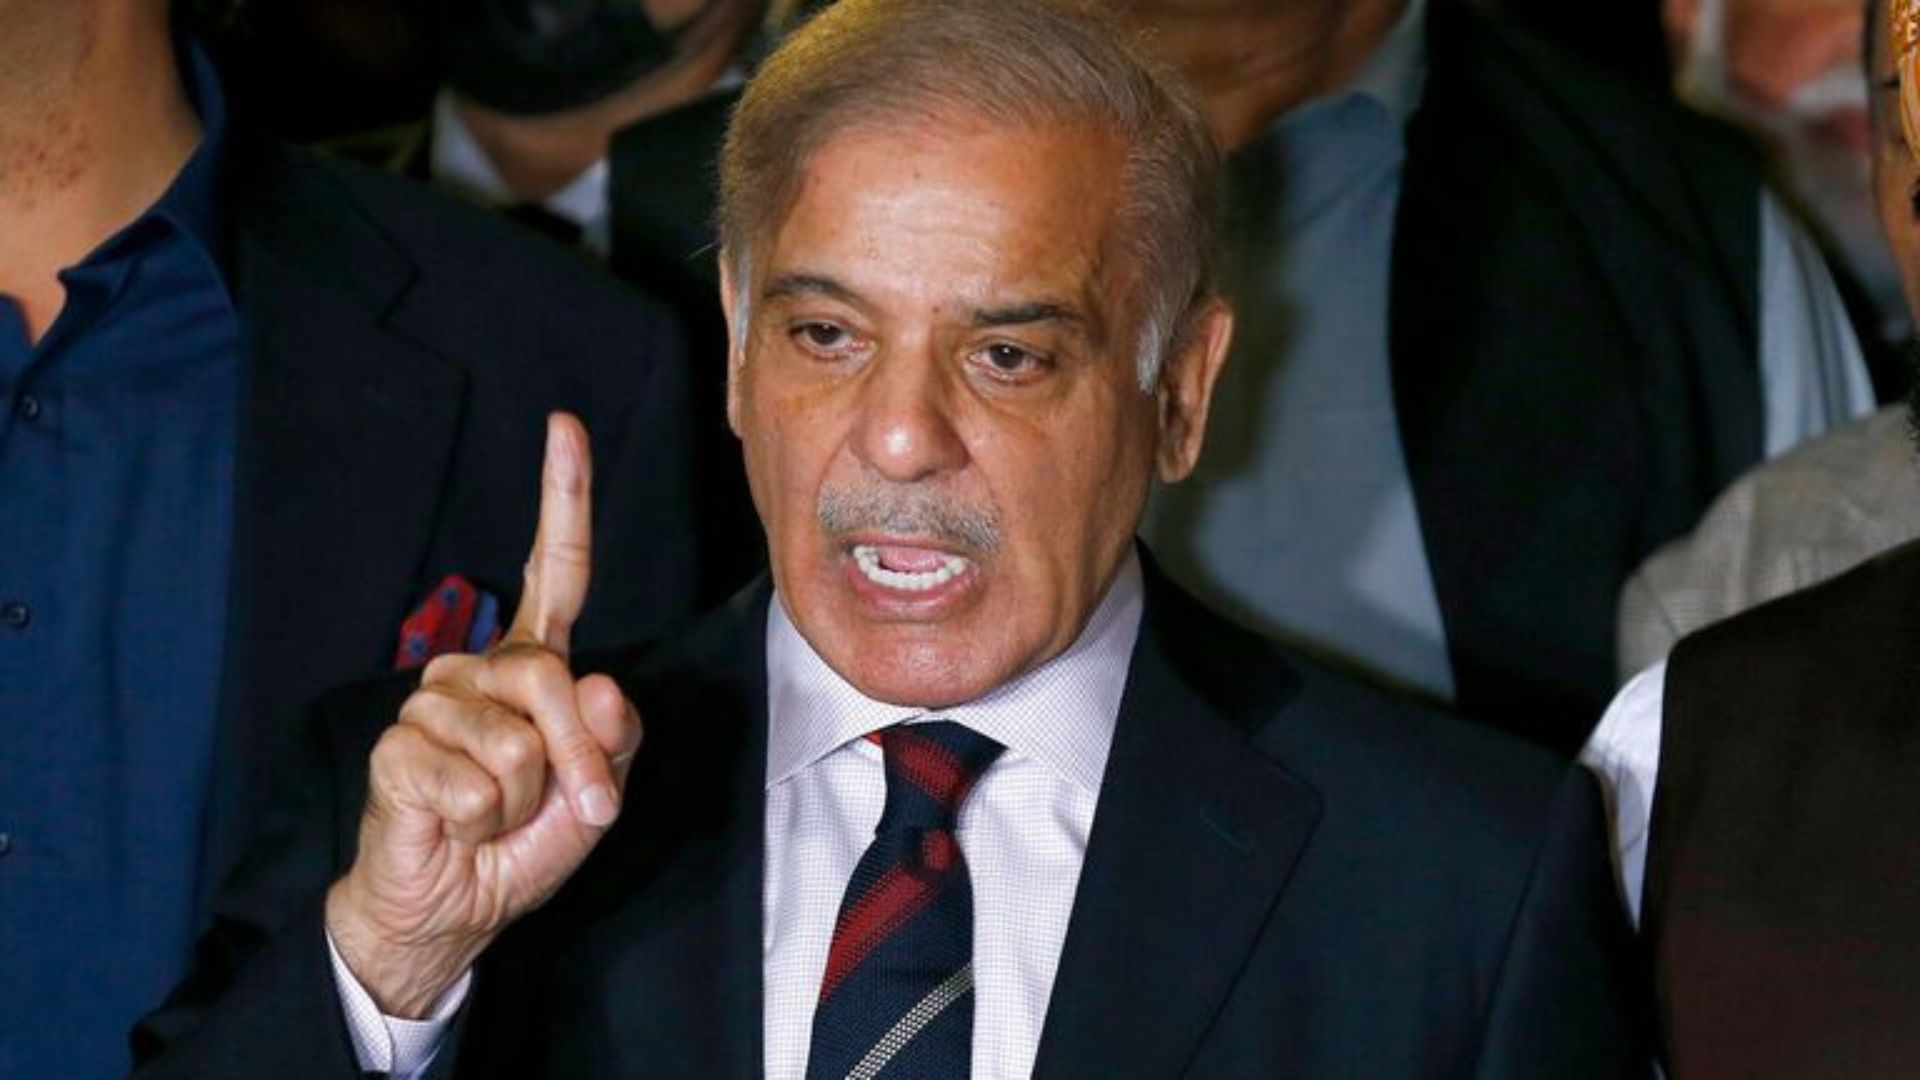 Pakistan: Shehbaz Sharif Elected as the PM For The 2nd Time